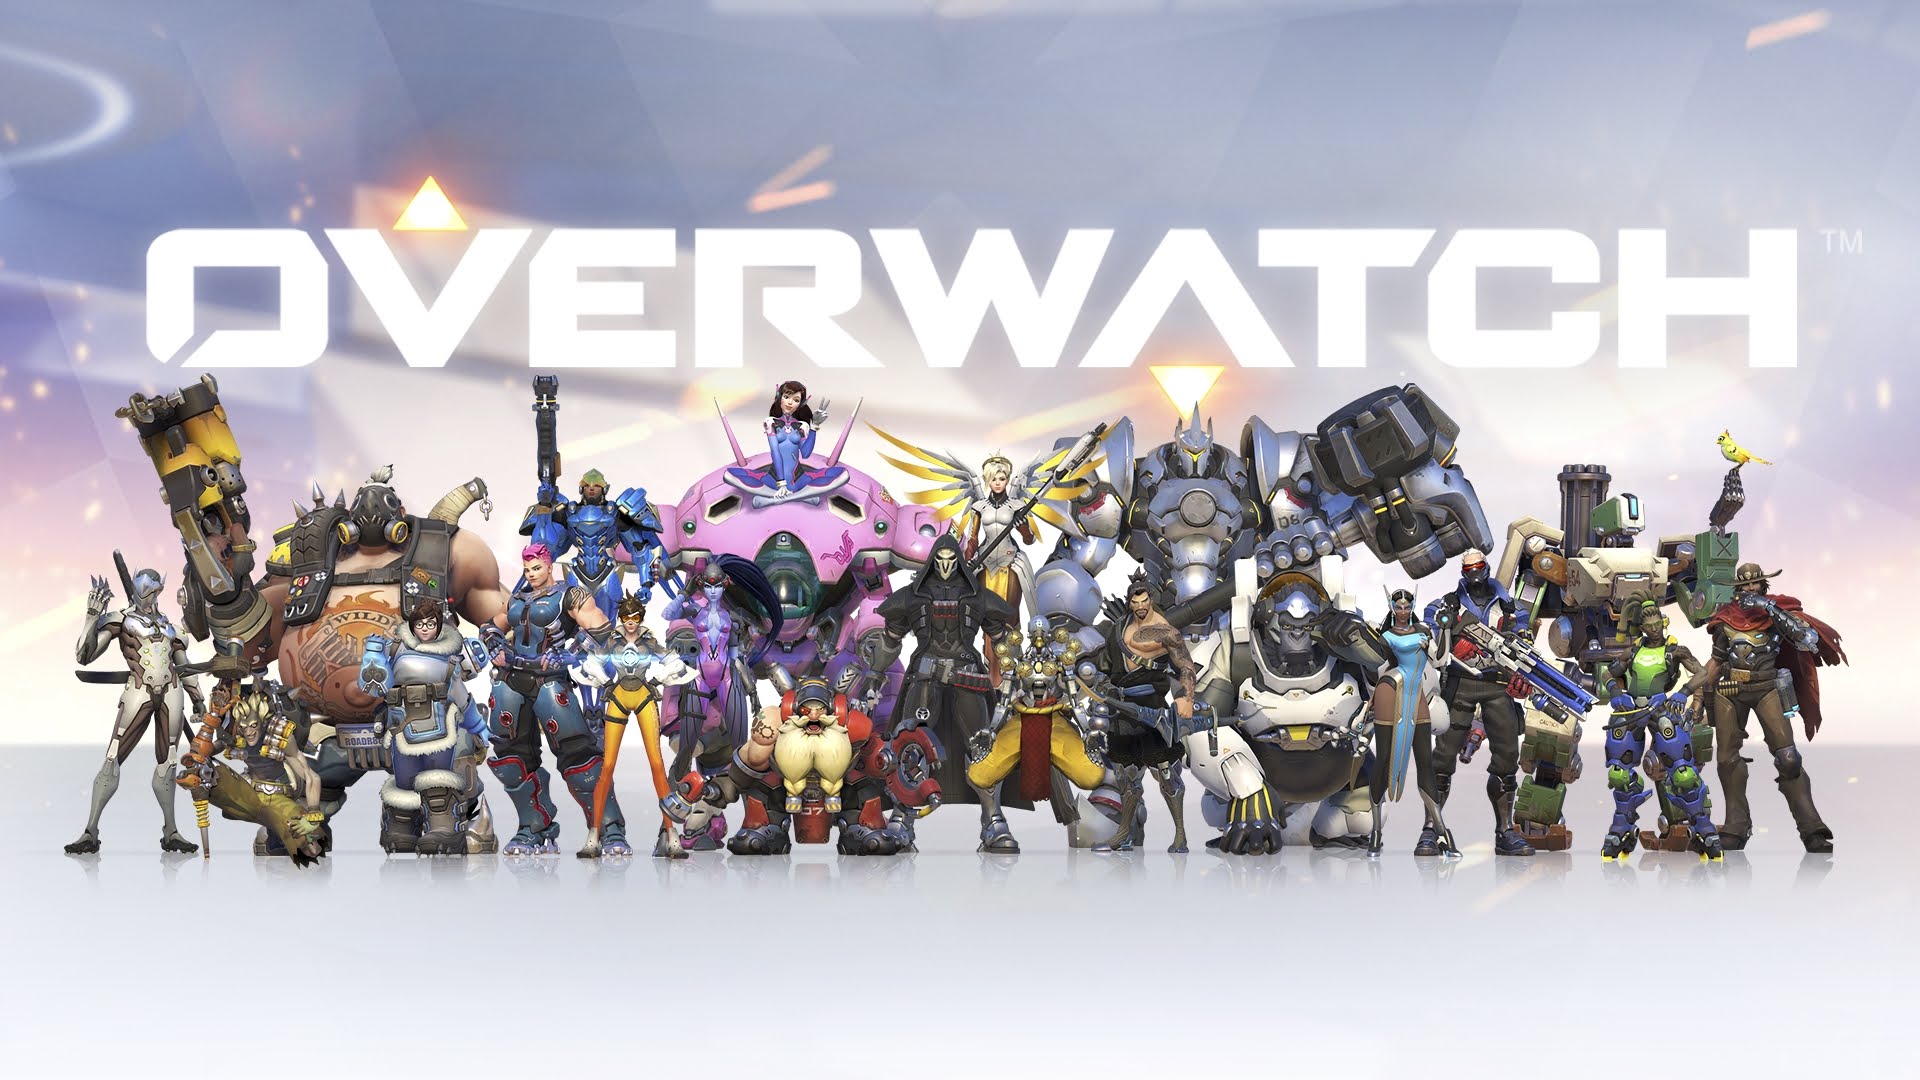 Overwatch: Game of the Year Edition coming to retail stores soon